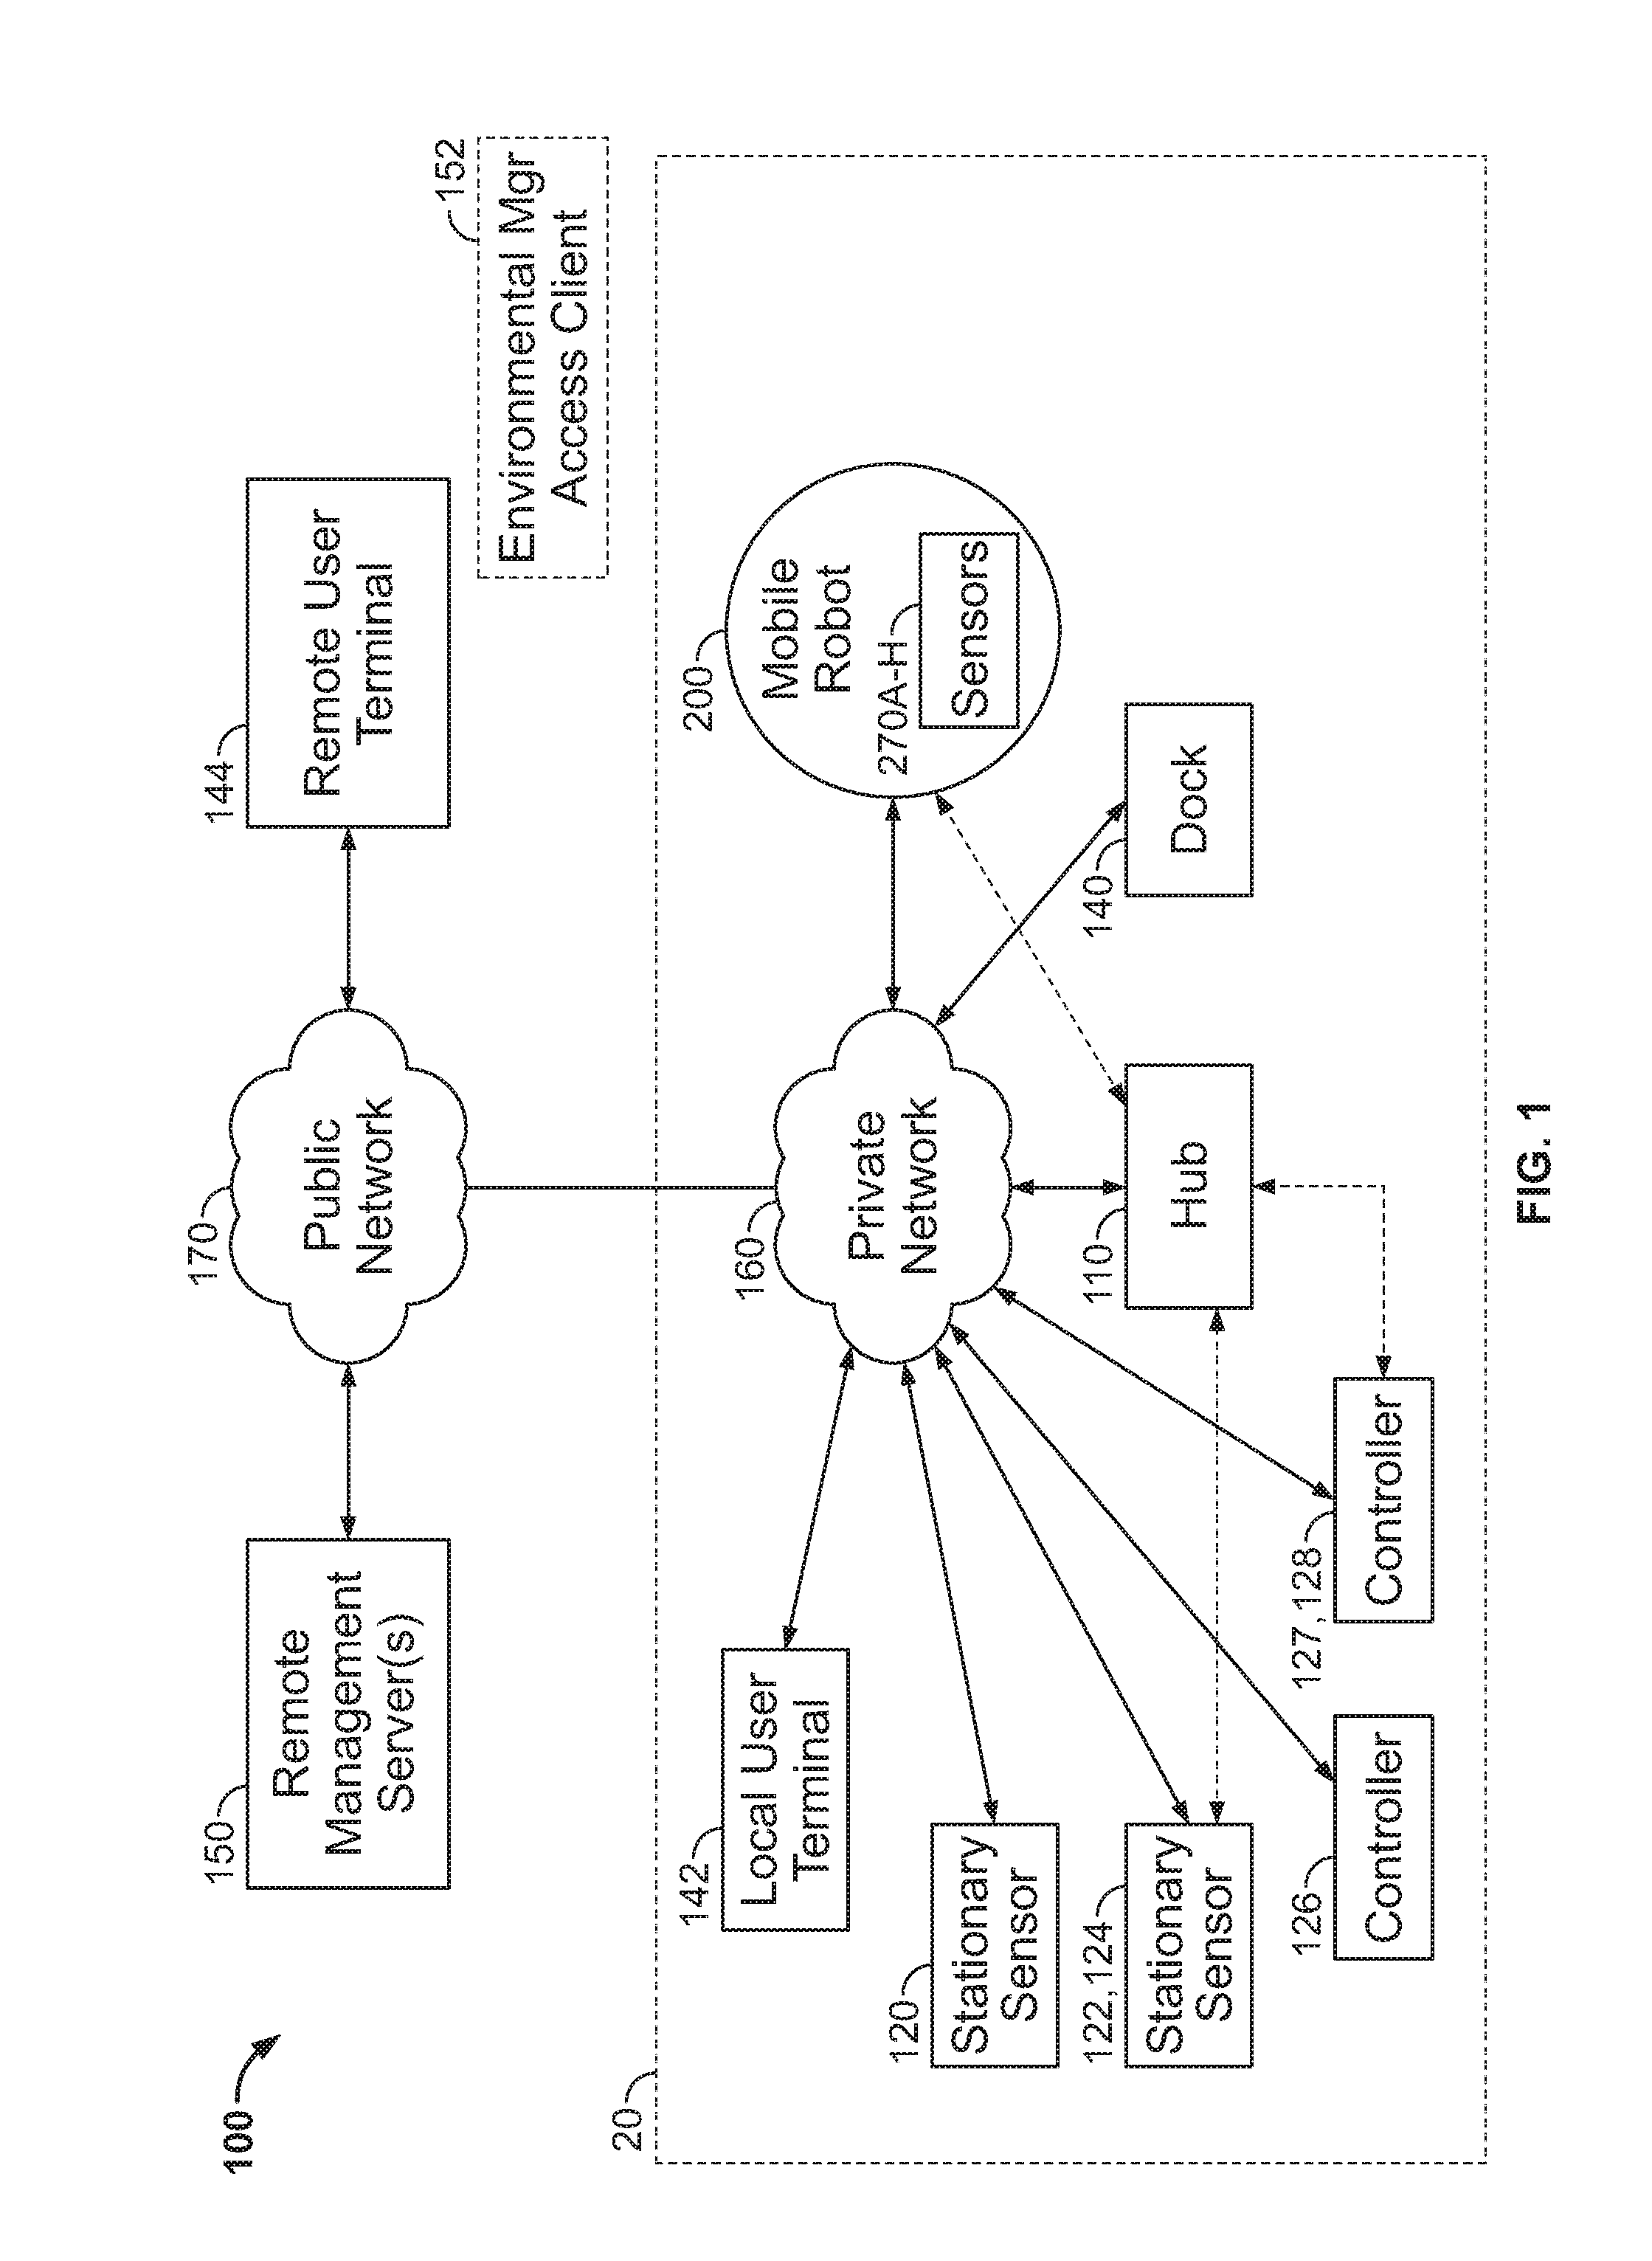 Environmental management systems including mobile robots and methods using same